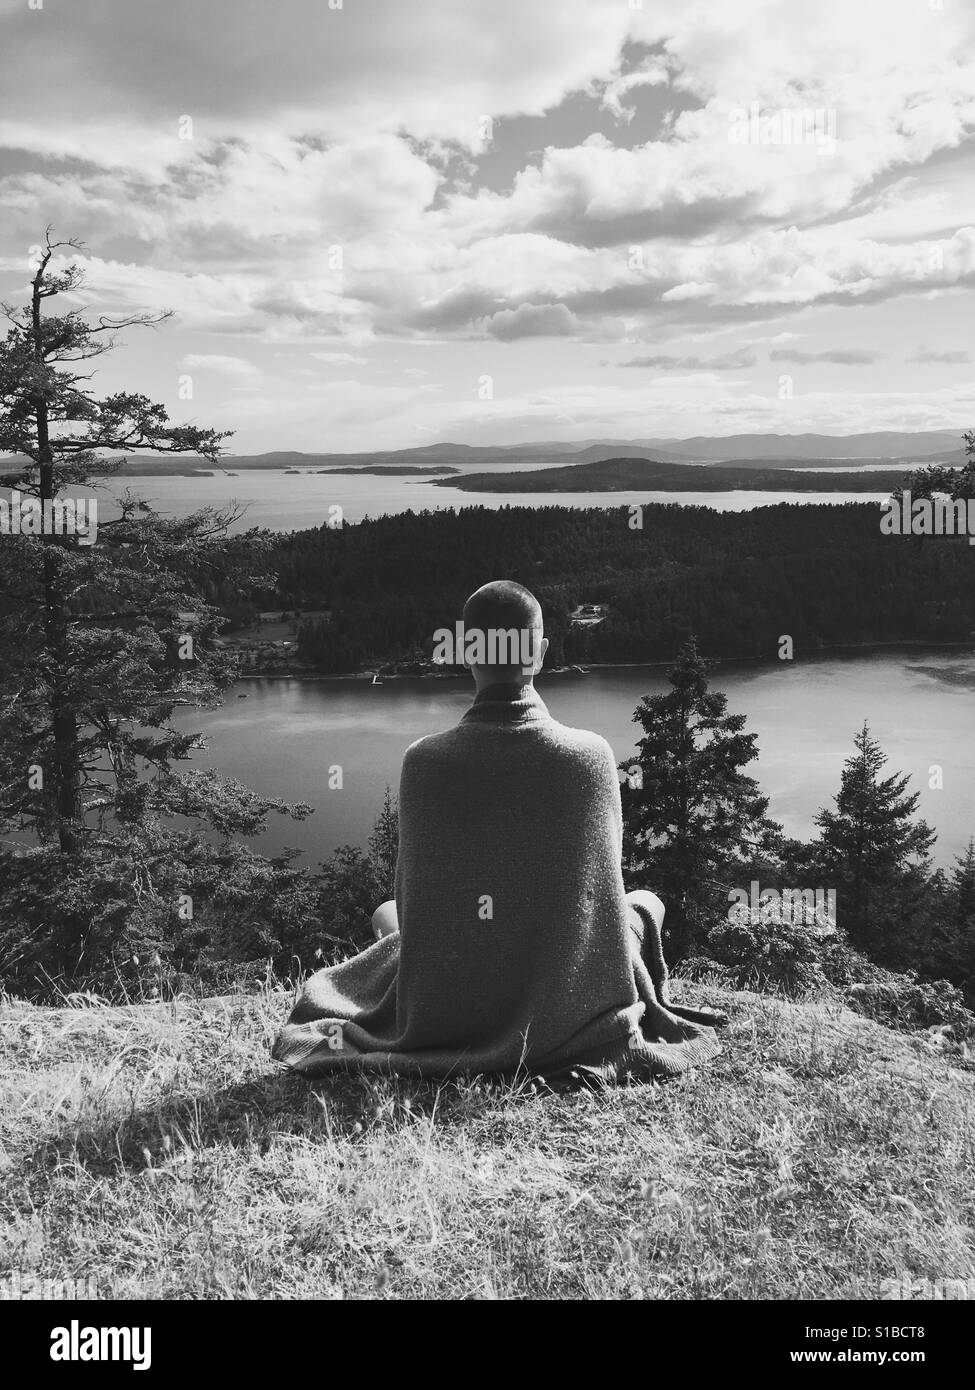 Black and white photo of person in flowing clothing with shaved head Meditating on a mountaintop overlooking the Gulf Islands Canada Stock Photo